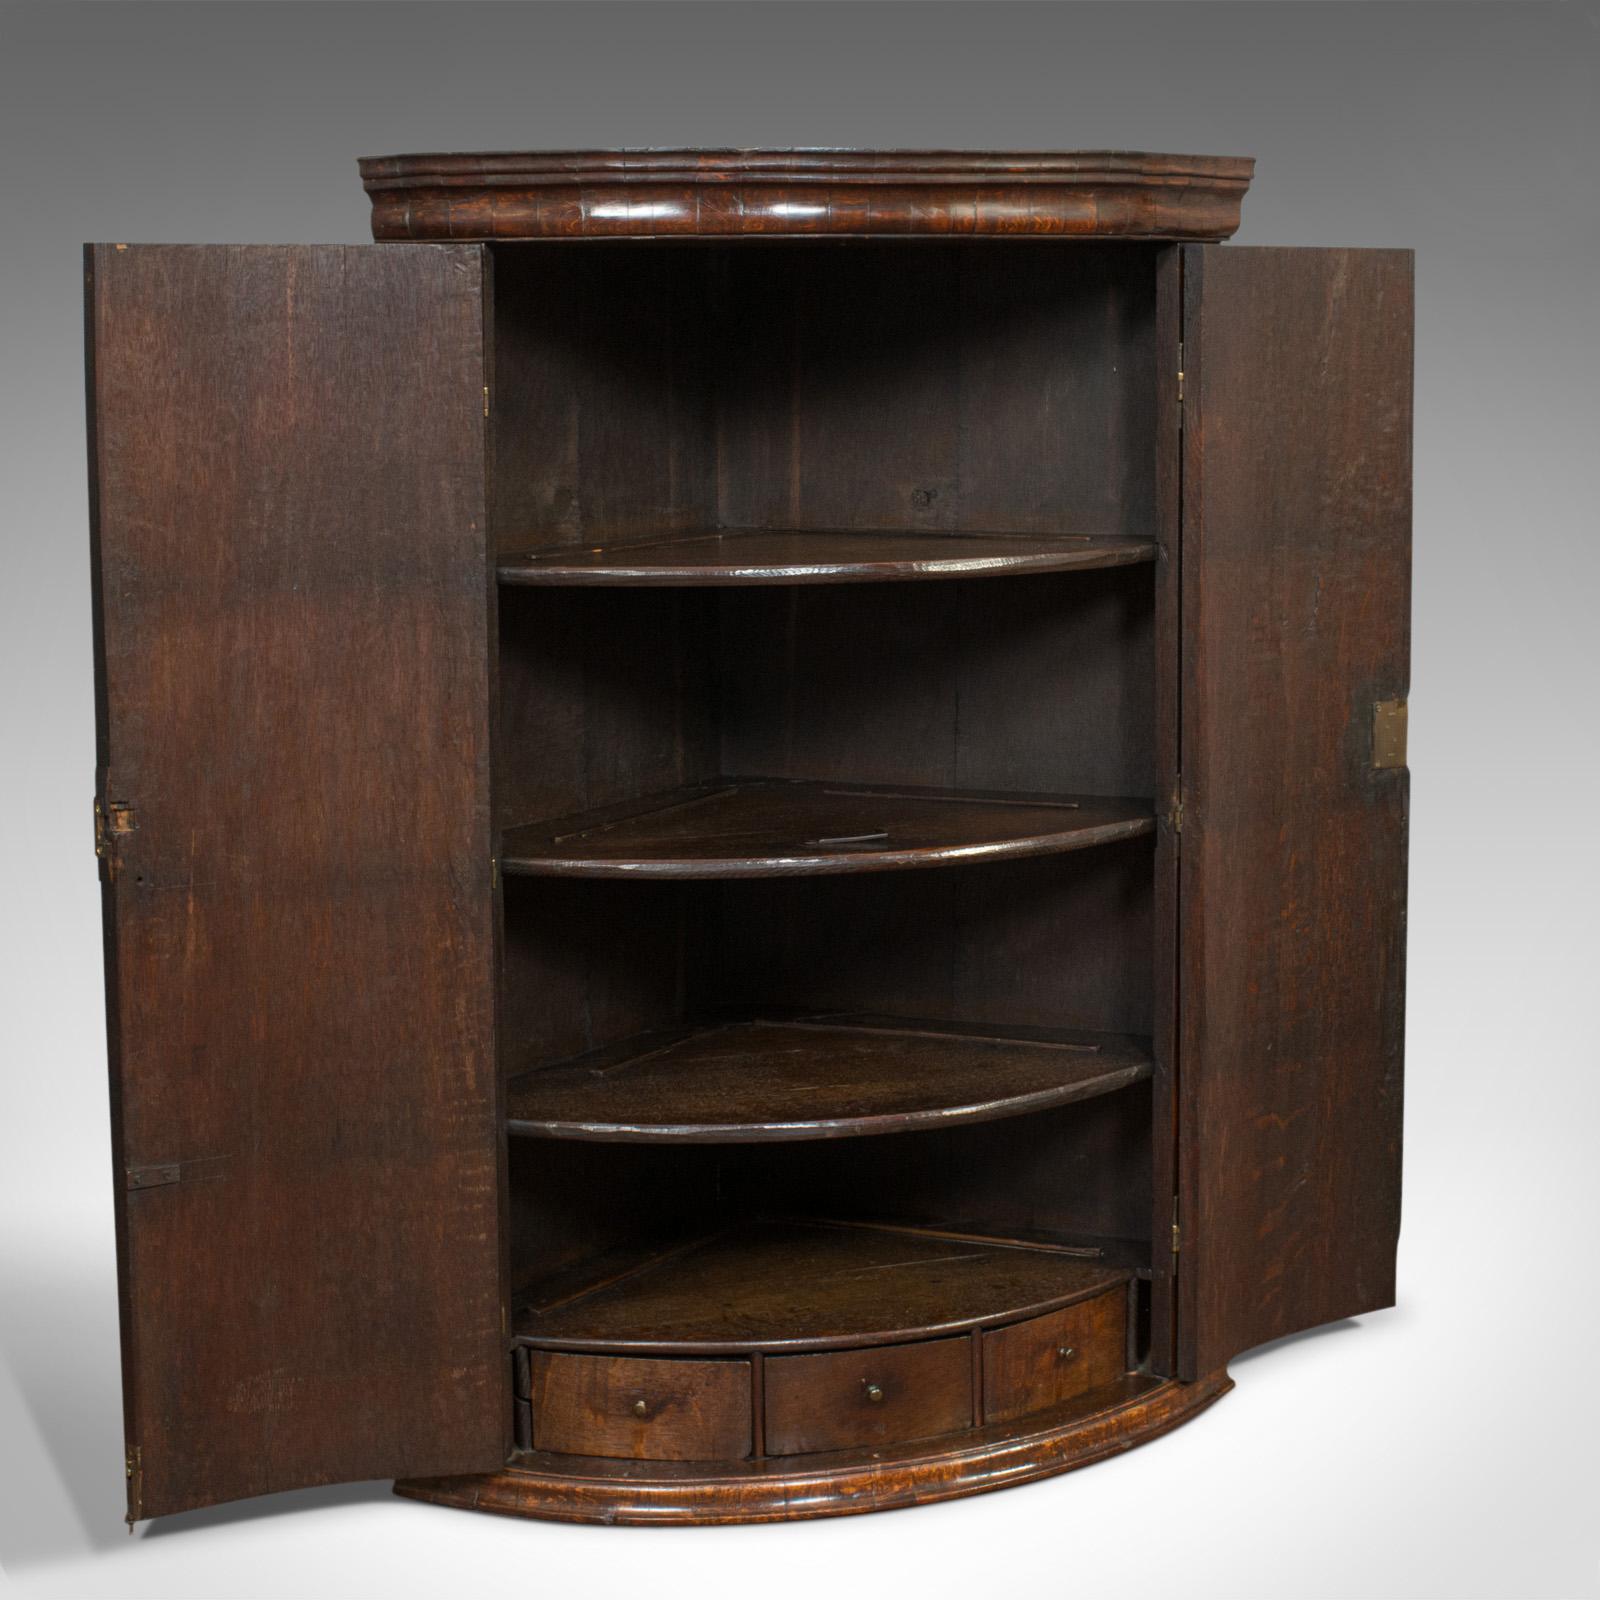 This is an antique corner cupboard. An English, oak bow front hanging cabinet dating to the Georgian period of the 18th century, circa 1760.

A splendid Georgian cabinet
Displays a desirable aged patina
Striking book-matched oak shows fine grain